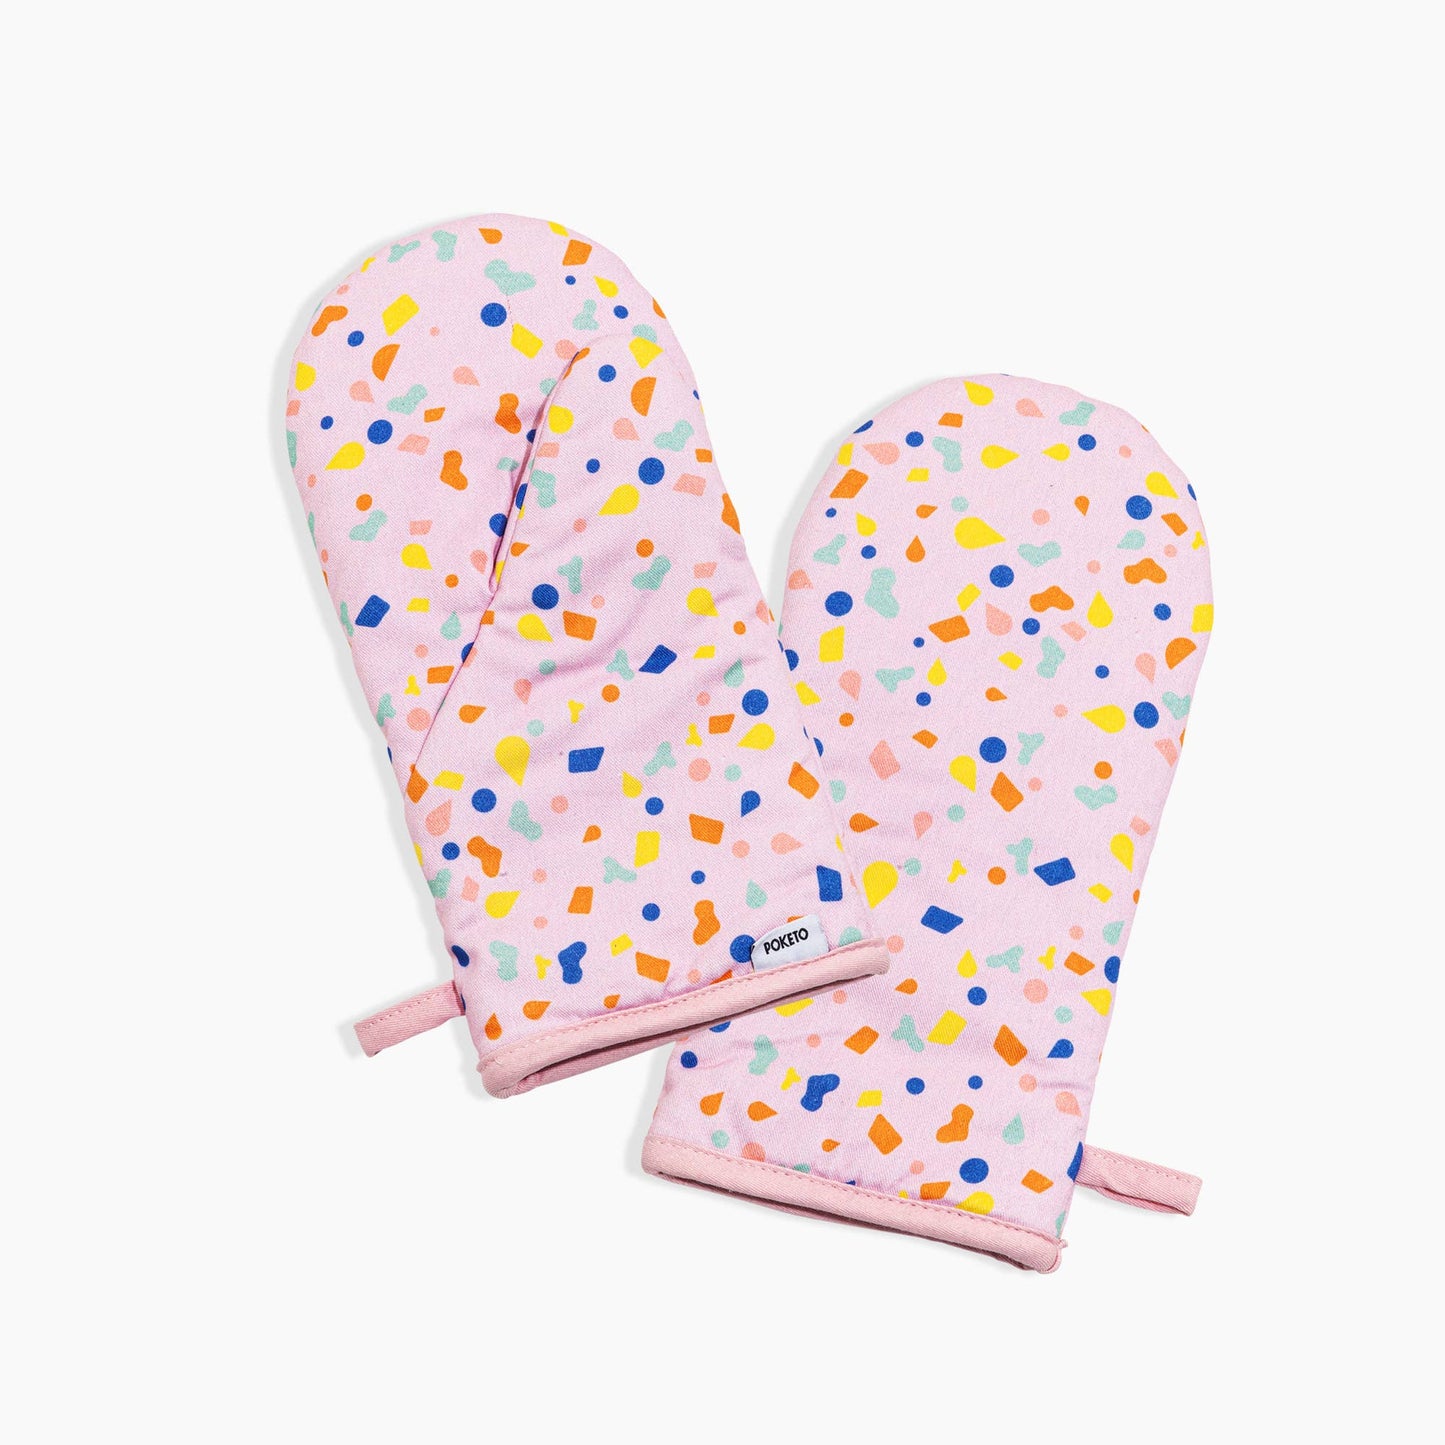 Oven Mitts in Pink Confetti